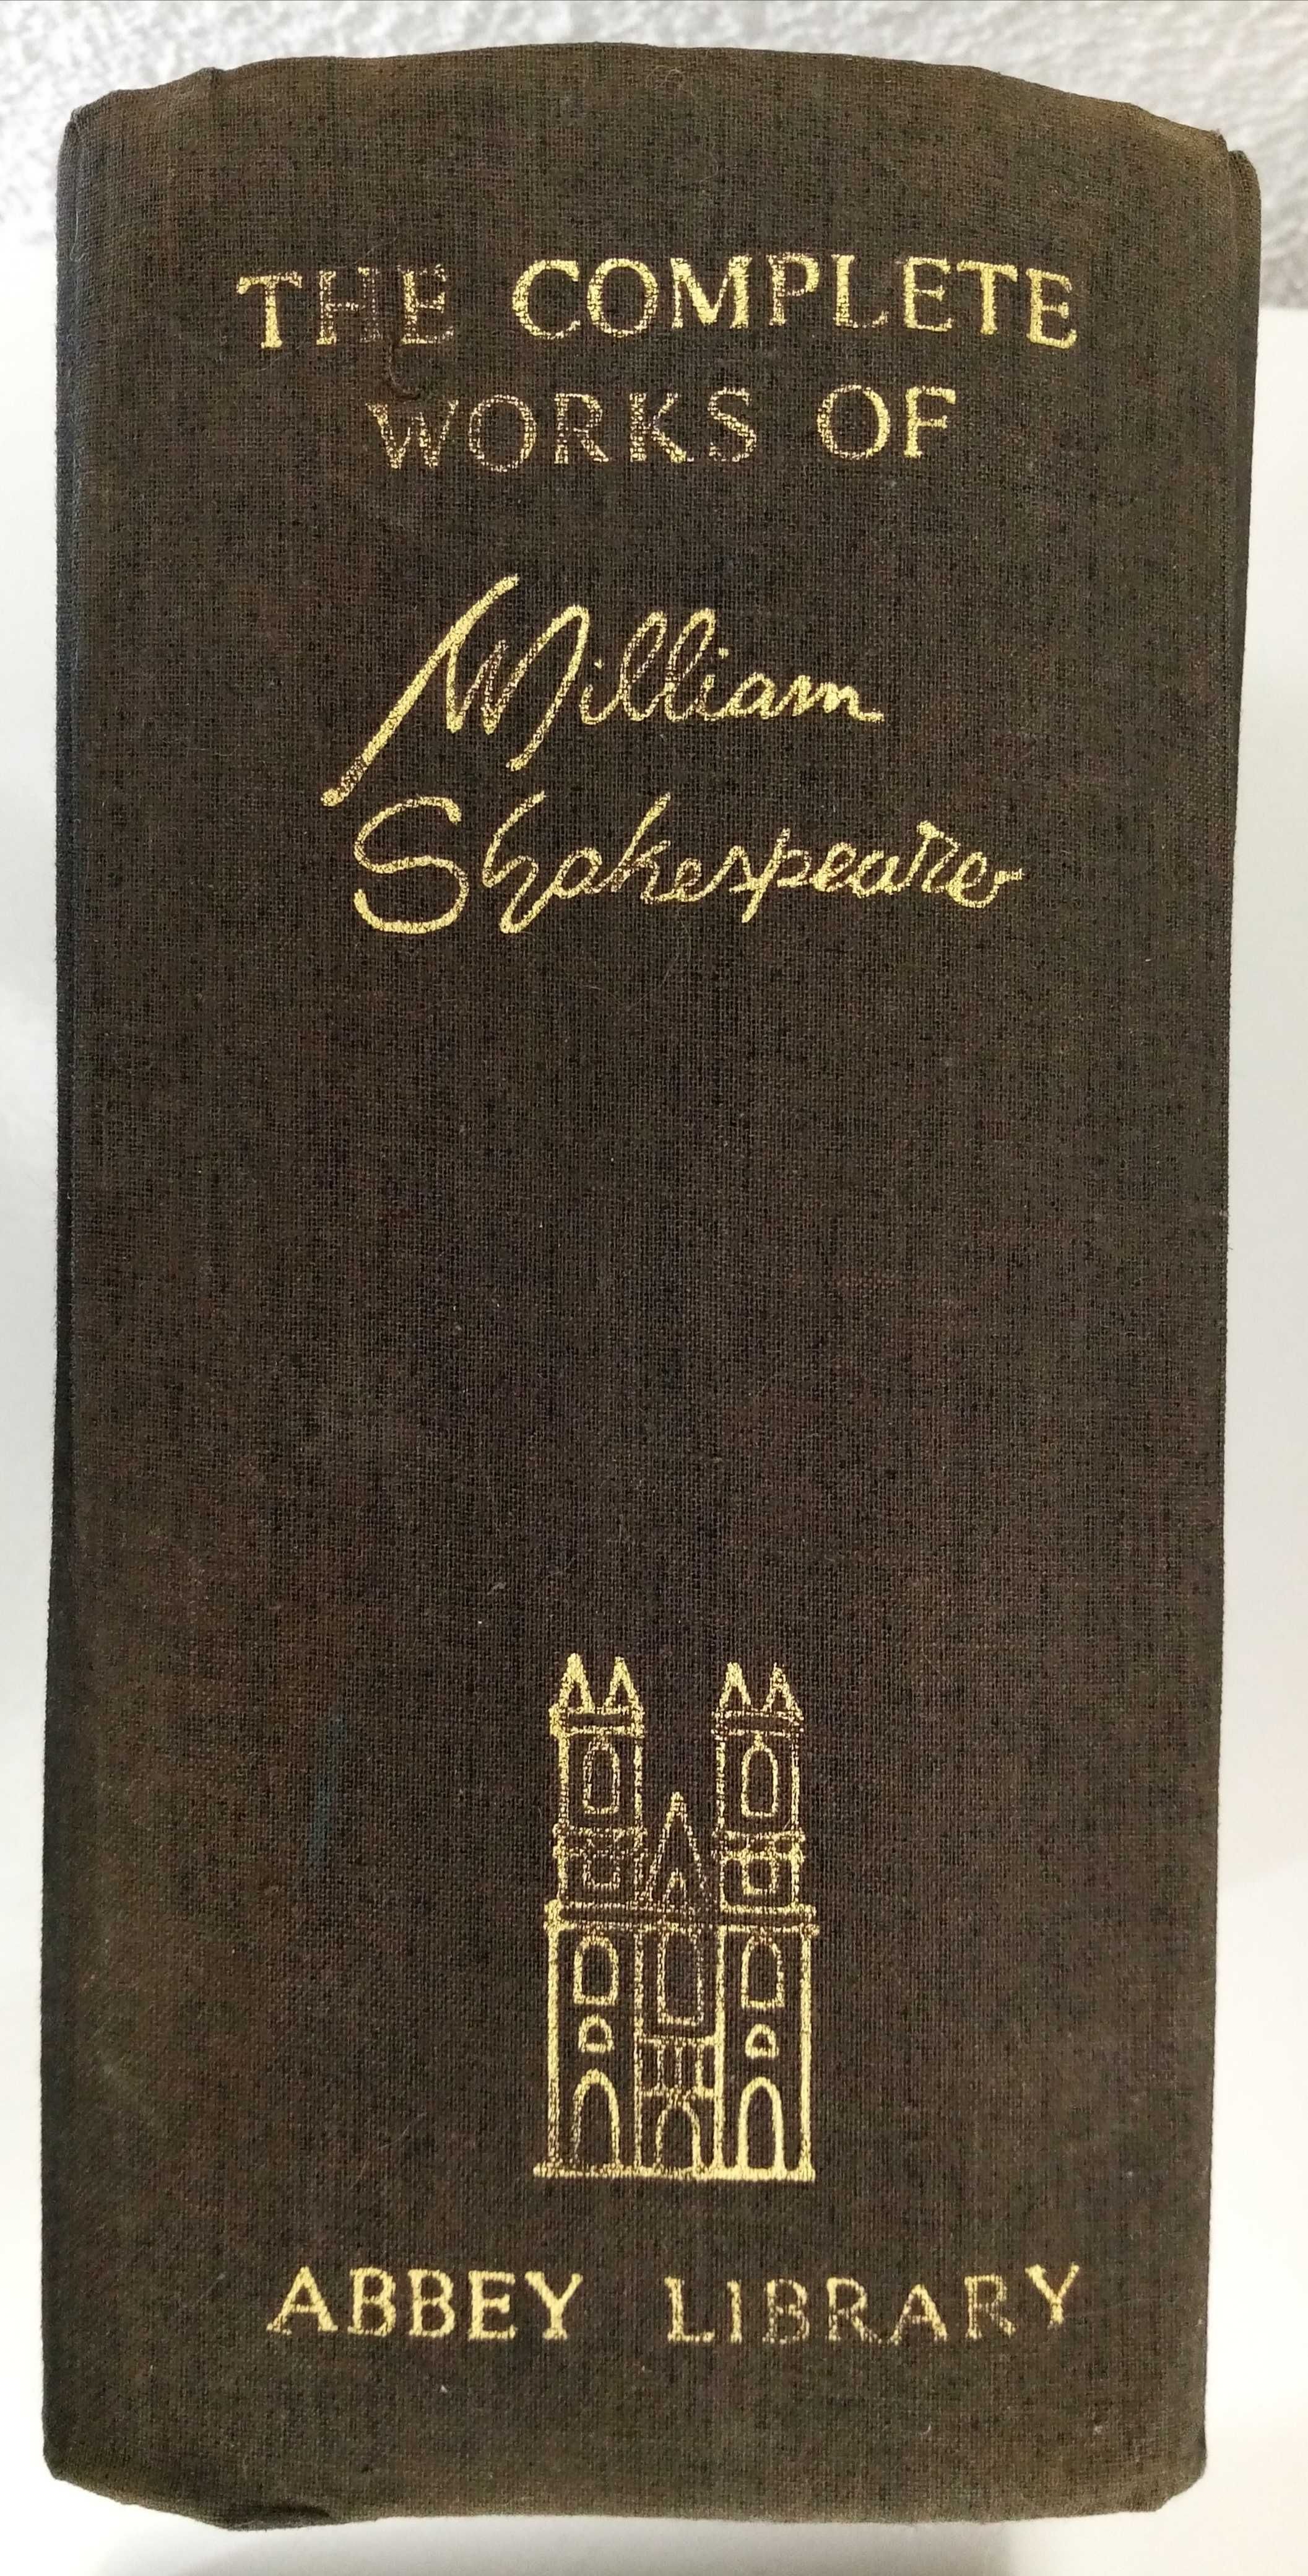 The Complete Works of William Shakespeare Abbey Library